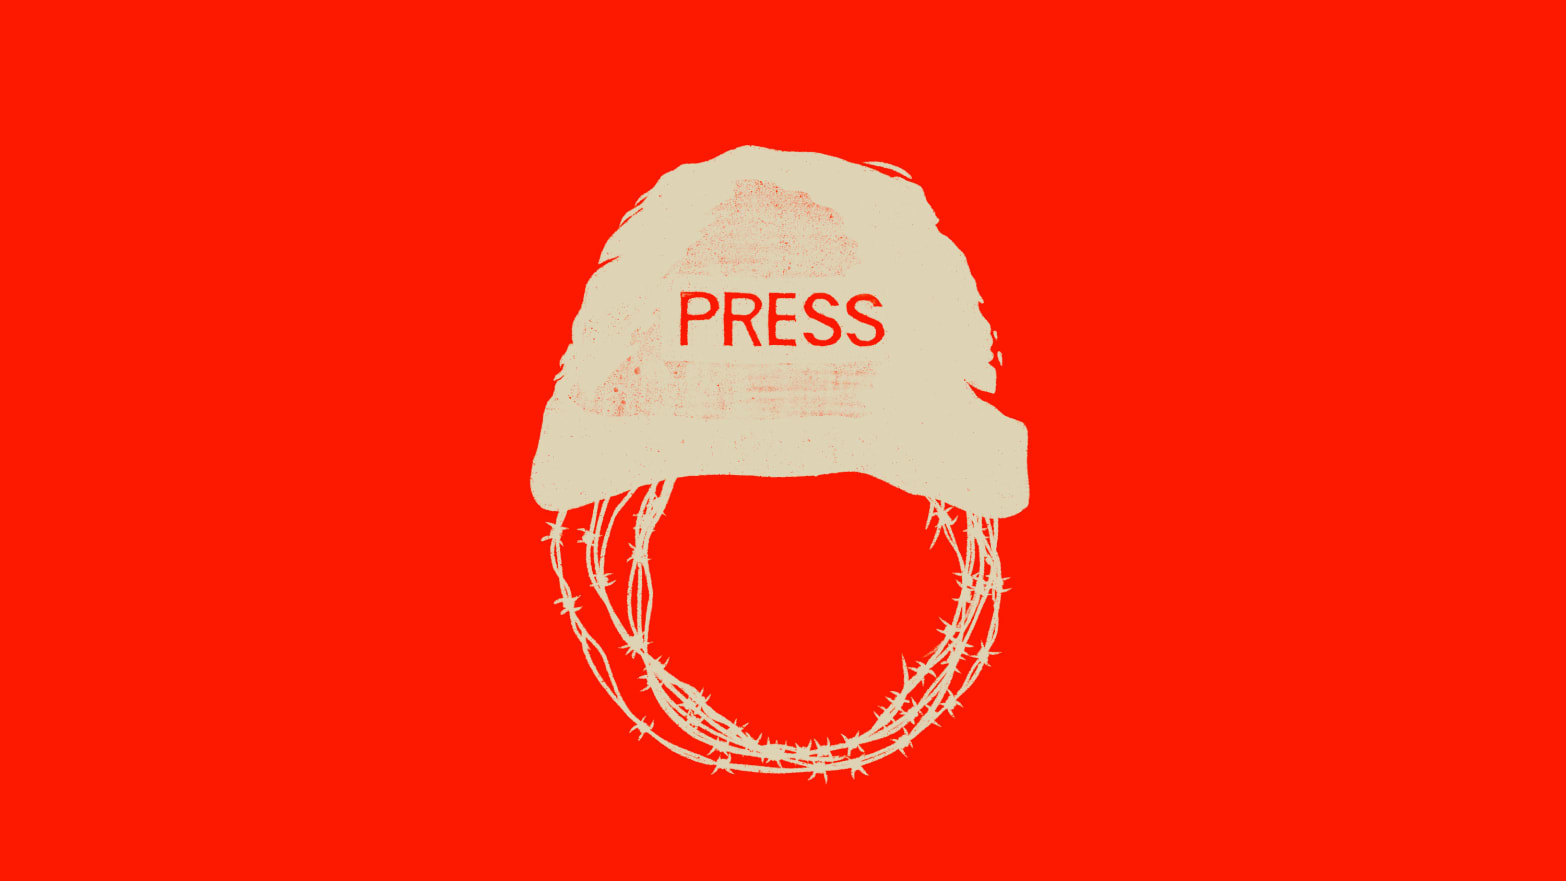 Press helmet with barbed wire as the chin strap on a red background